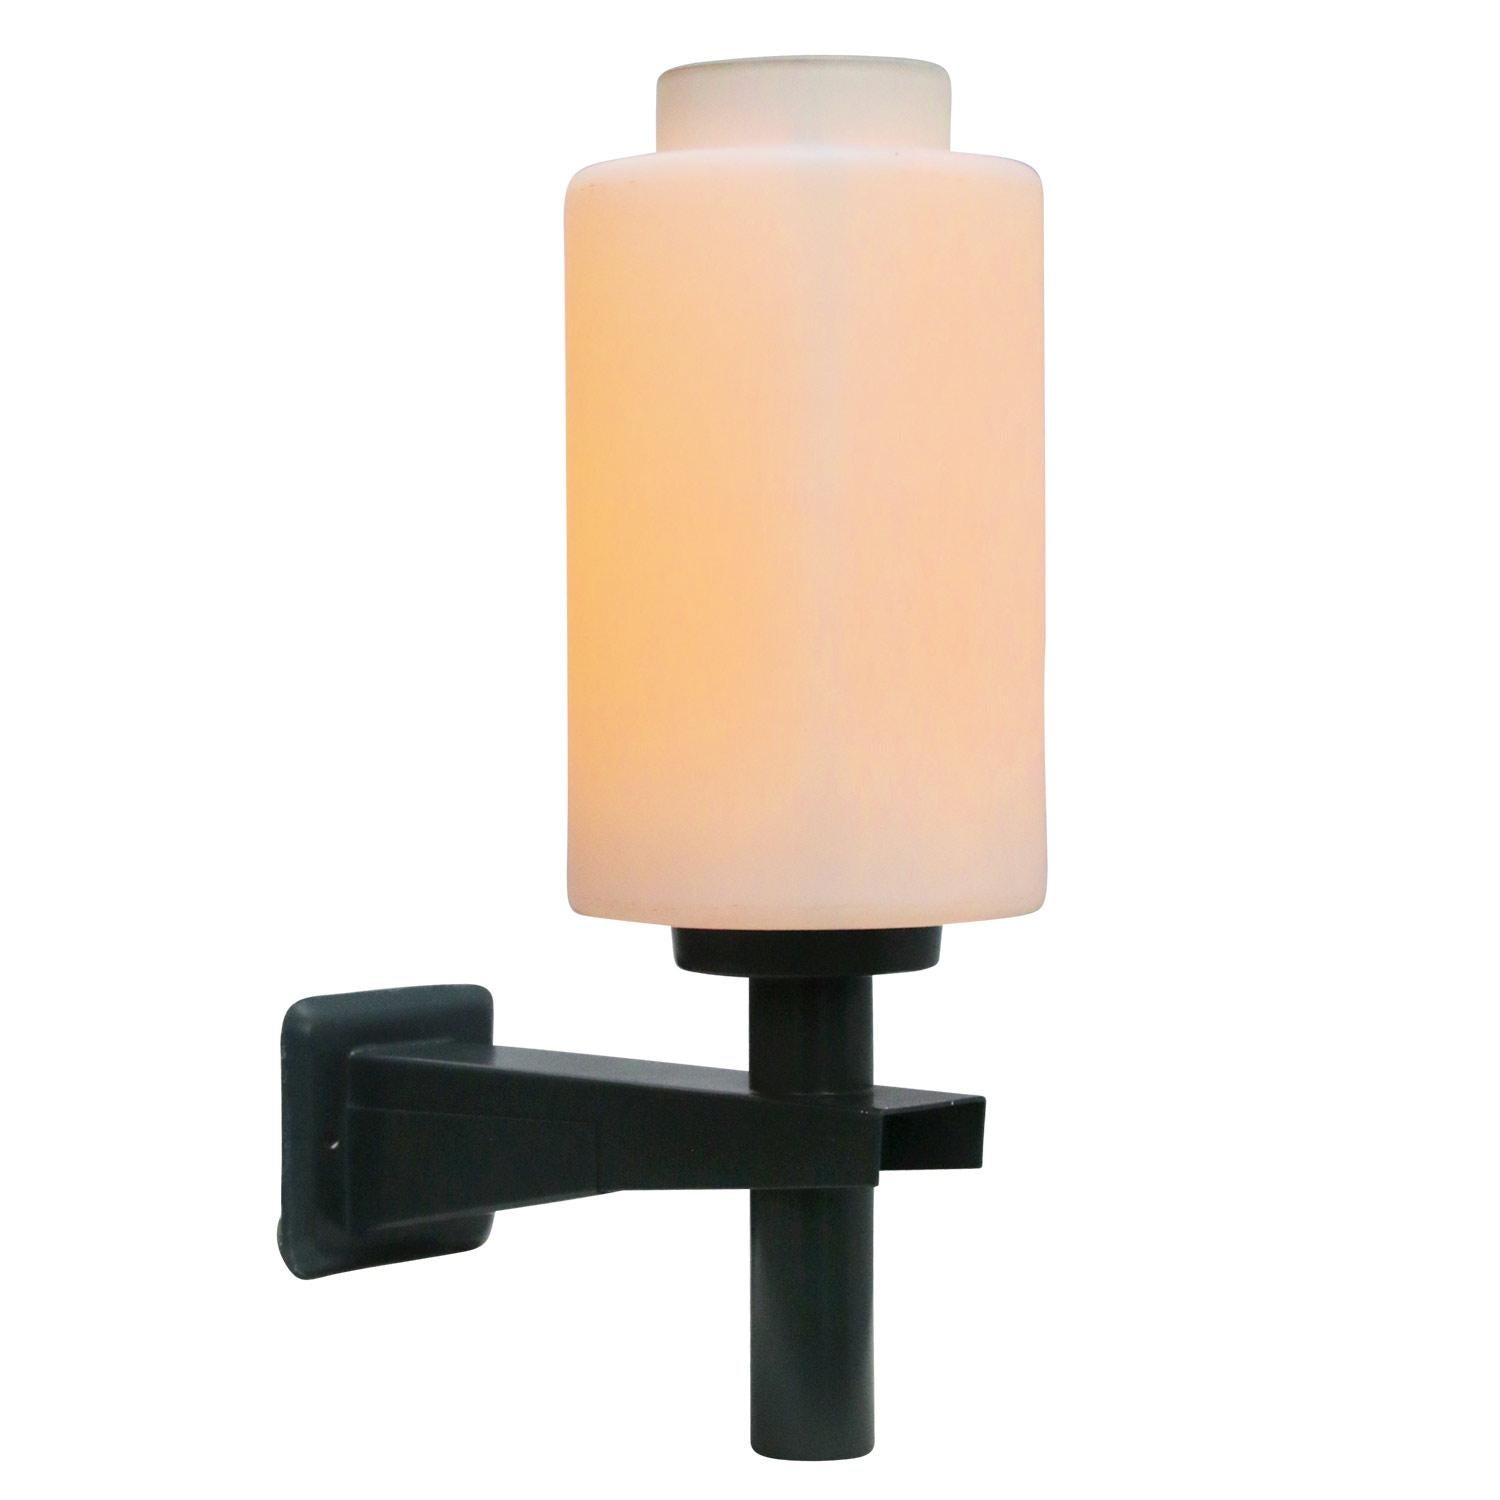 Metal and opaline glass wall lamp.
Used in a Dutch monastery

wall plate 8.5 × 8.5 cm

for use inside only

Weight: 1.50 kg / 3.3 lb

Priced per individual item. All lamps have been made suitable by international standards for incandescent